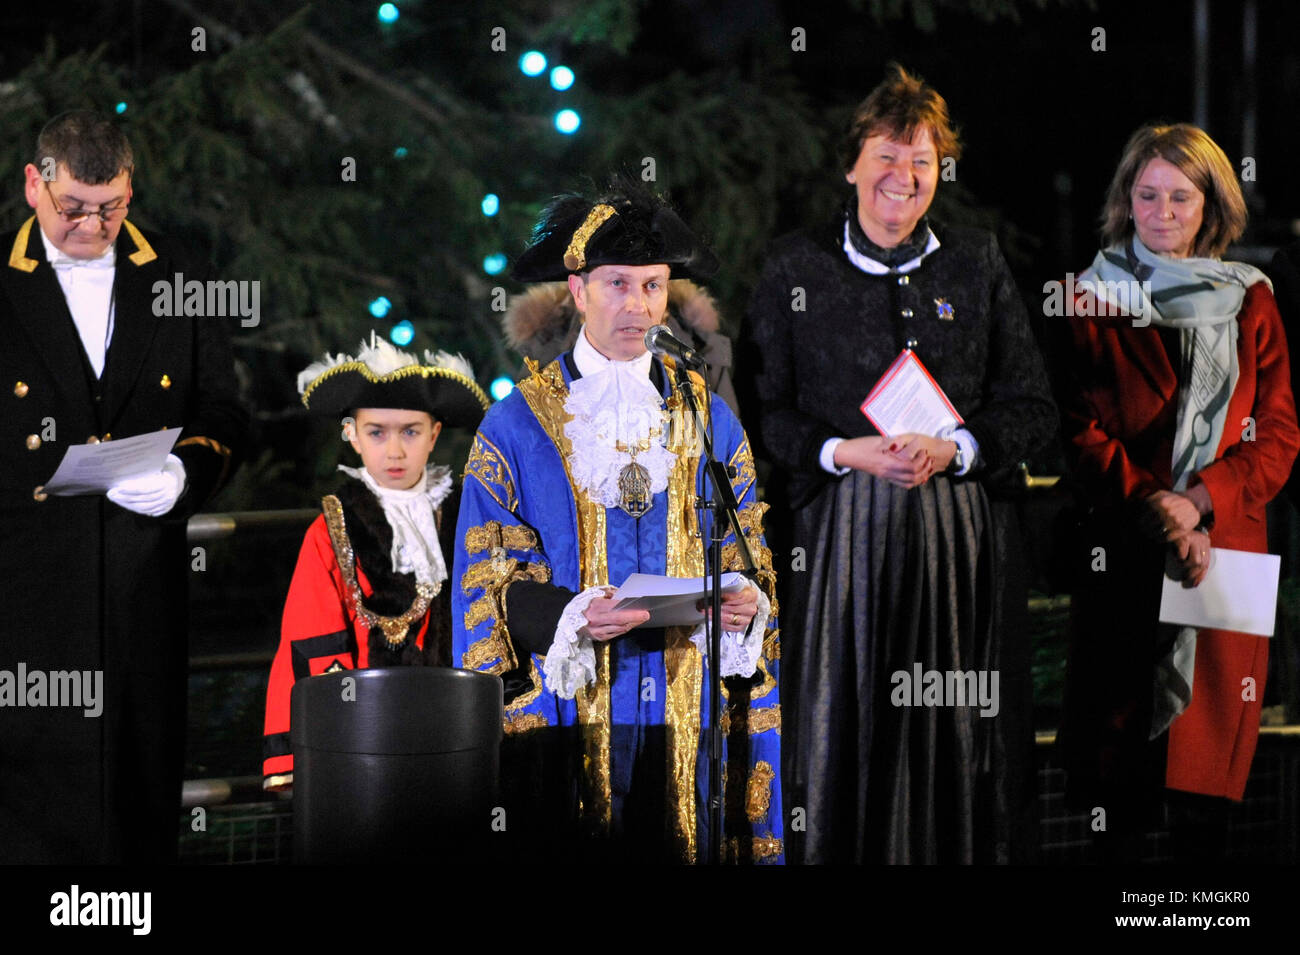 London, UK.  7 December 2017.  Ian Adams, The Lord Mayor of Westminster, speaks at the ceremony for the annual lighting of the Christmas Tree in Trafalgar Square.  The tree, a Norwegian spruce, is donated by the City of Oslo to the people of London each year as a token of gratitude for Britain’s support during the Second World War.  Credit: Stephen Chung / Alamy Live News Stock Photo